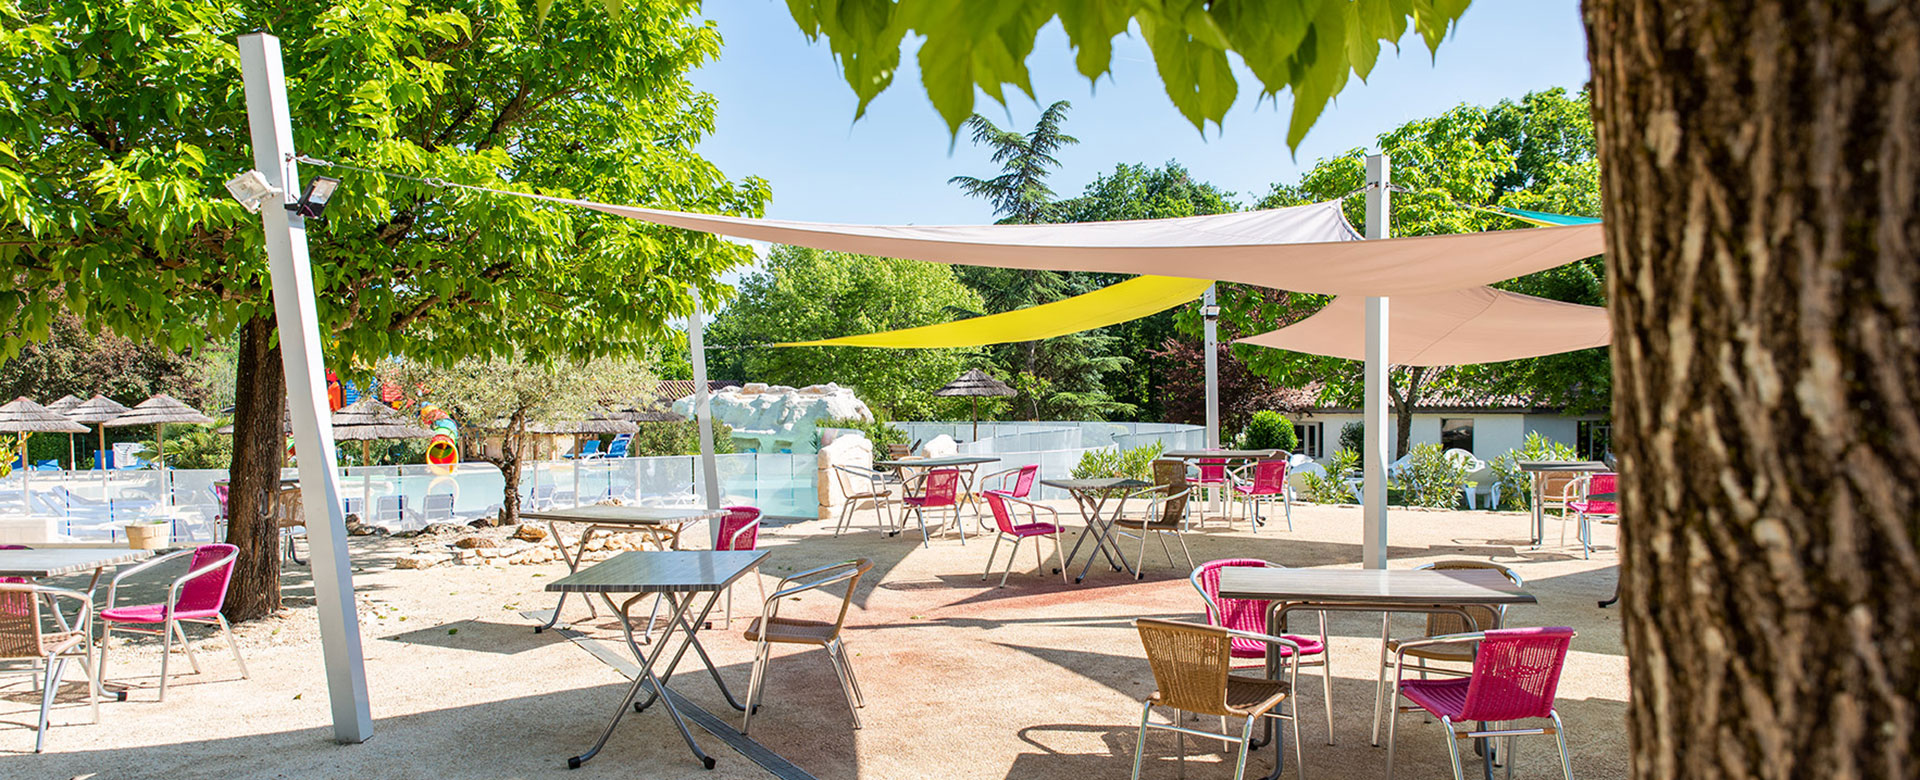 Camping l'Évasion’s restaurant located in the Quercy